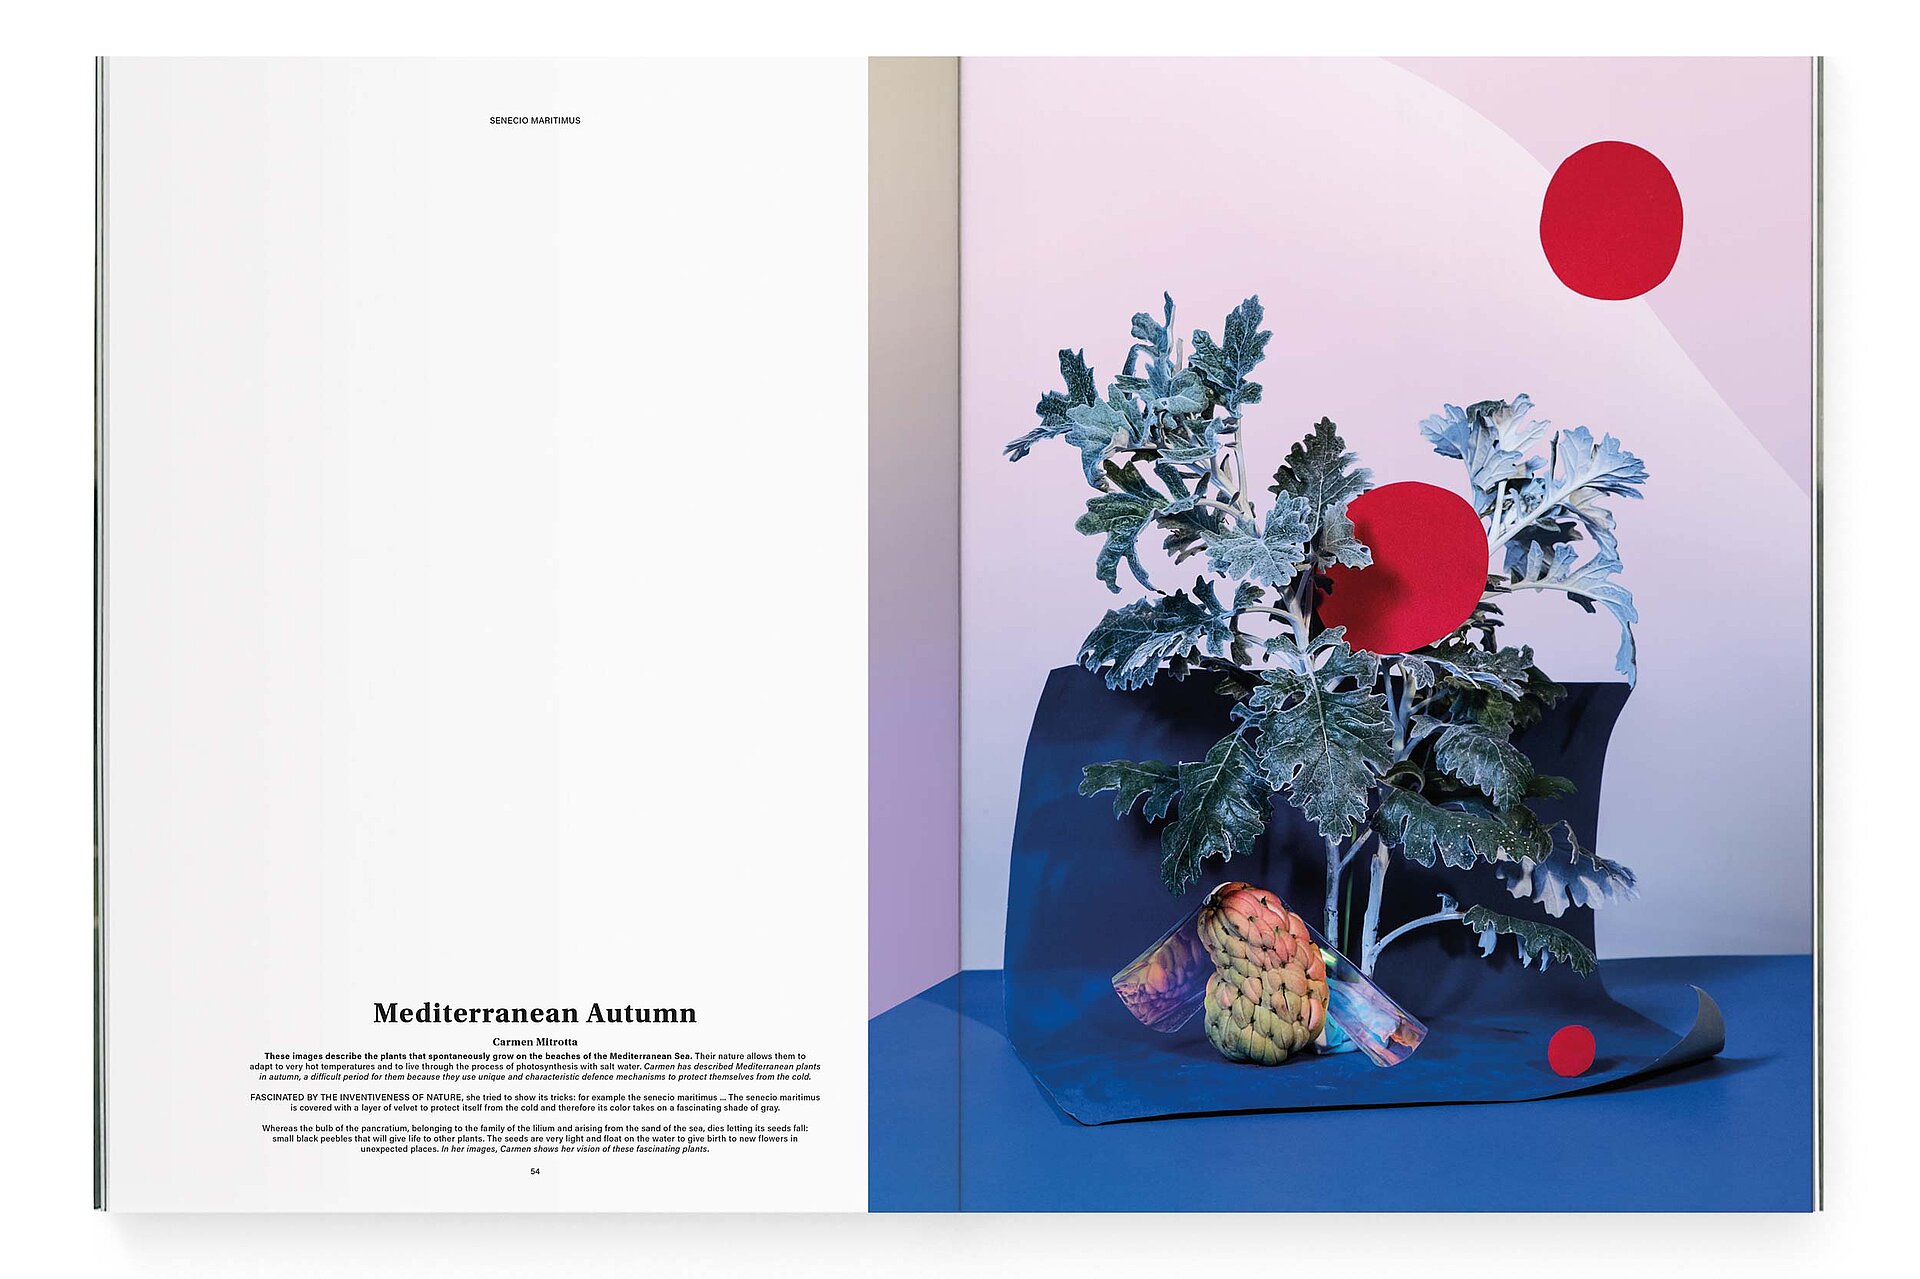 mjr magazine pages with installation with plants design bern